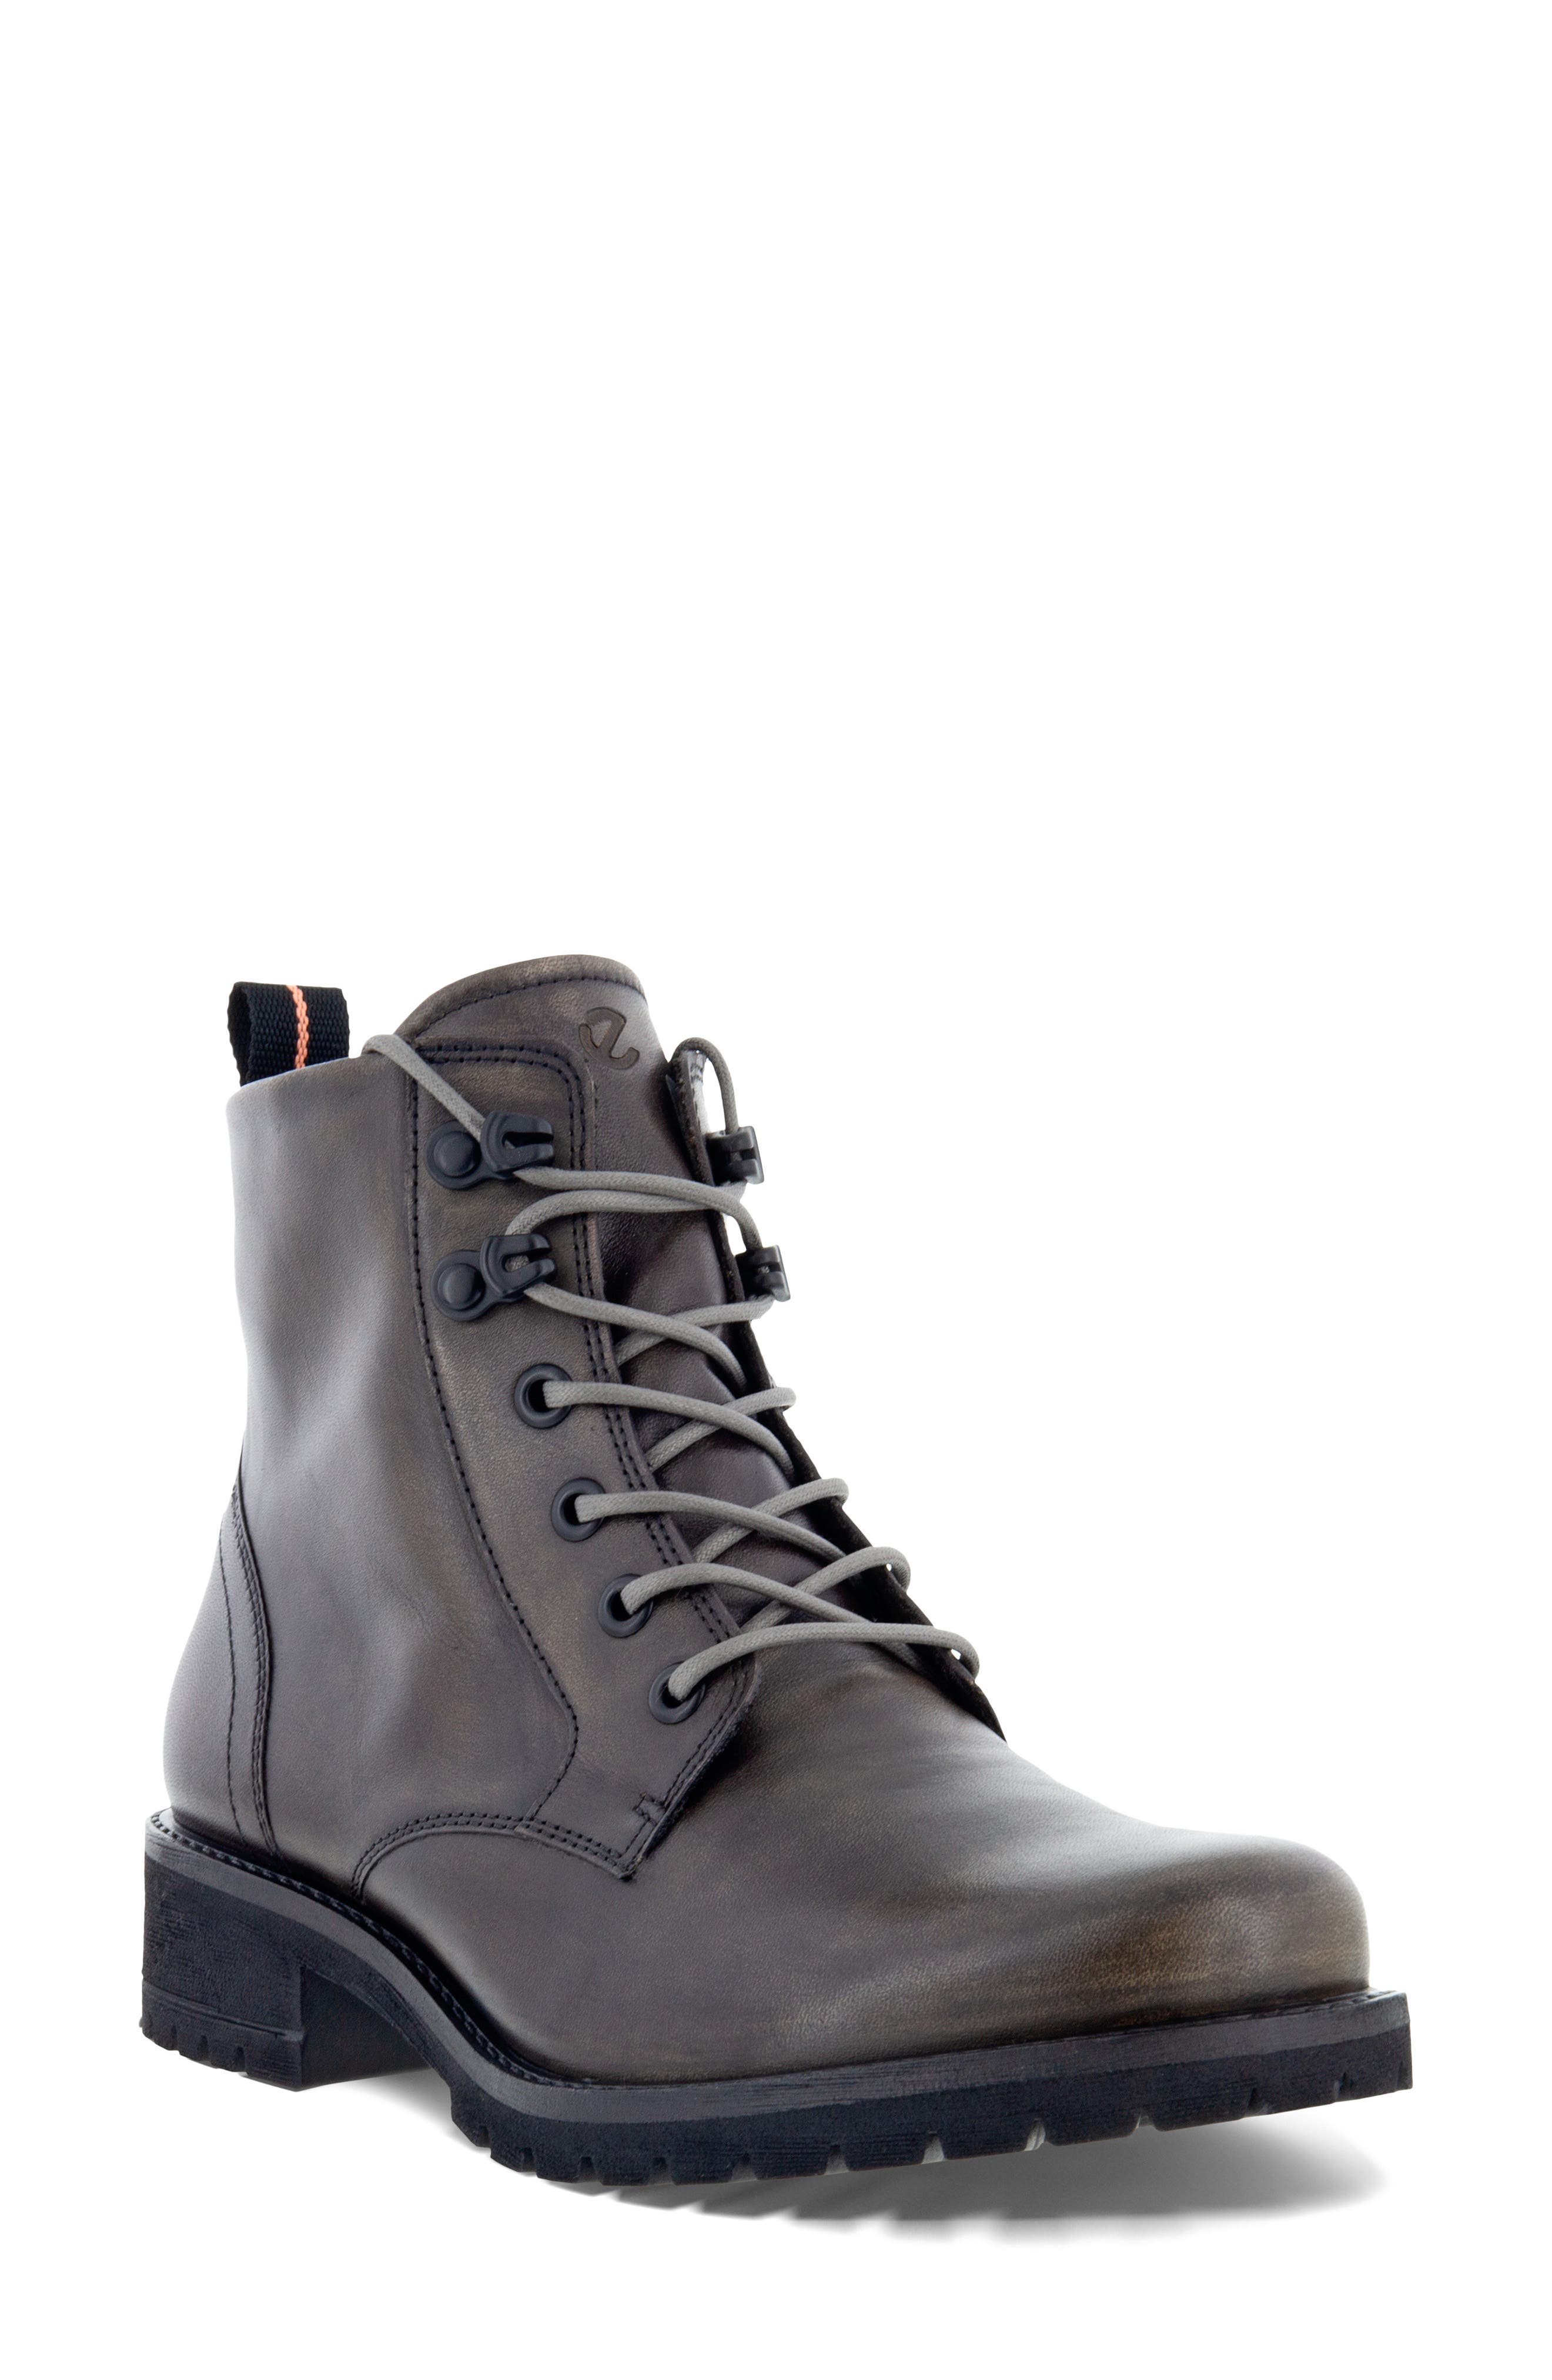 Ecco Elaina Street Lace-up Boot In Grey 